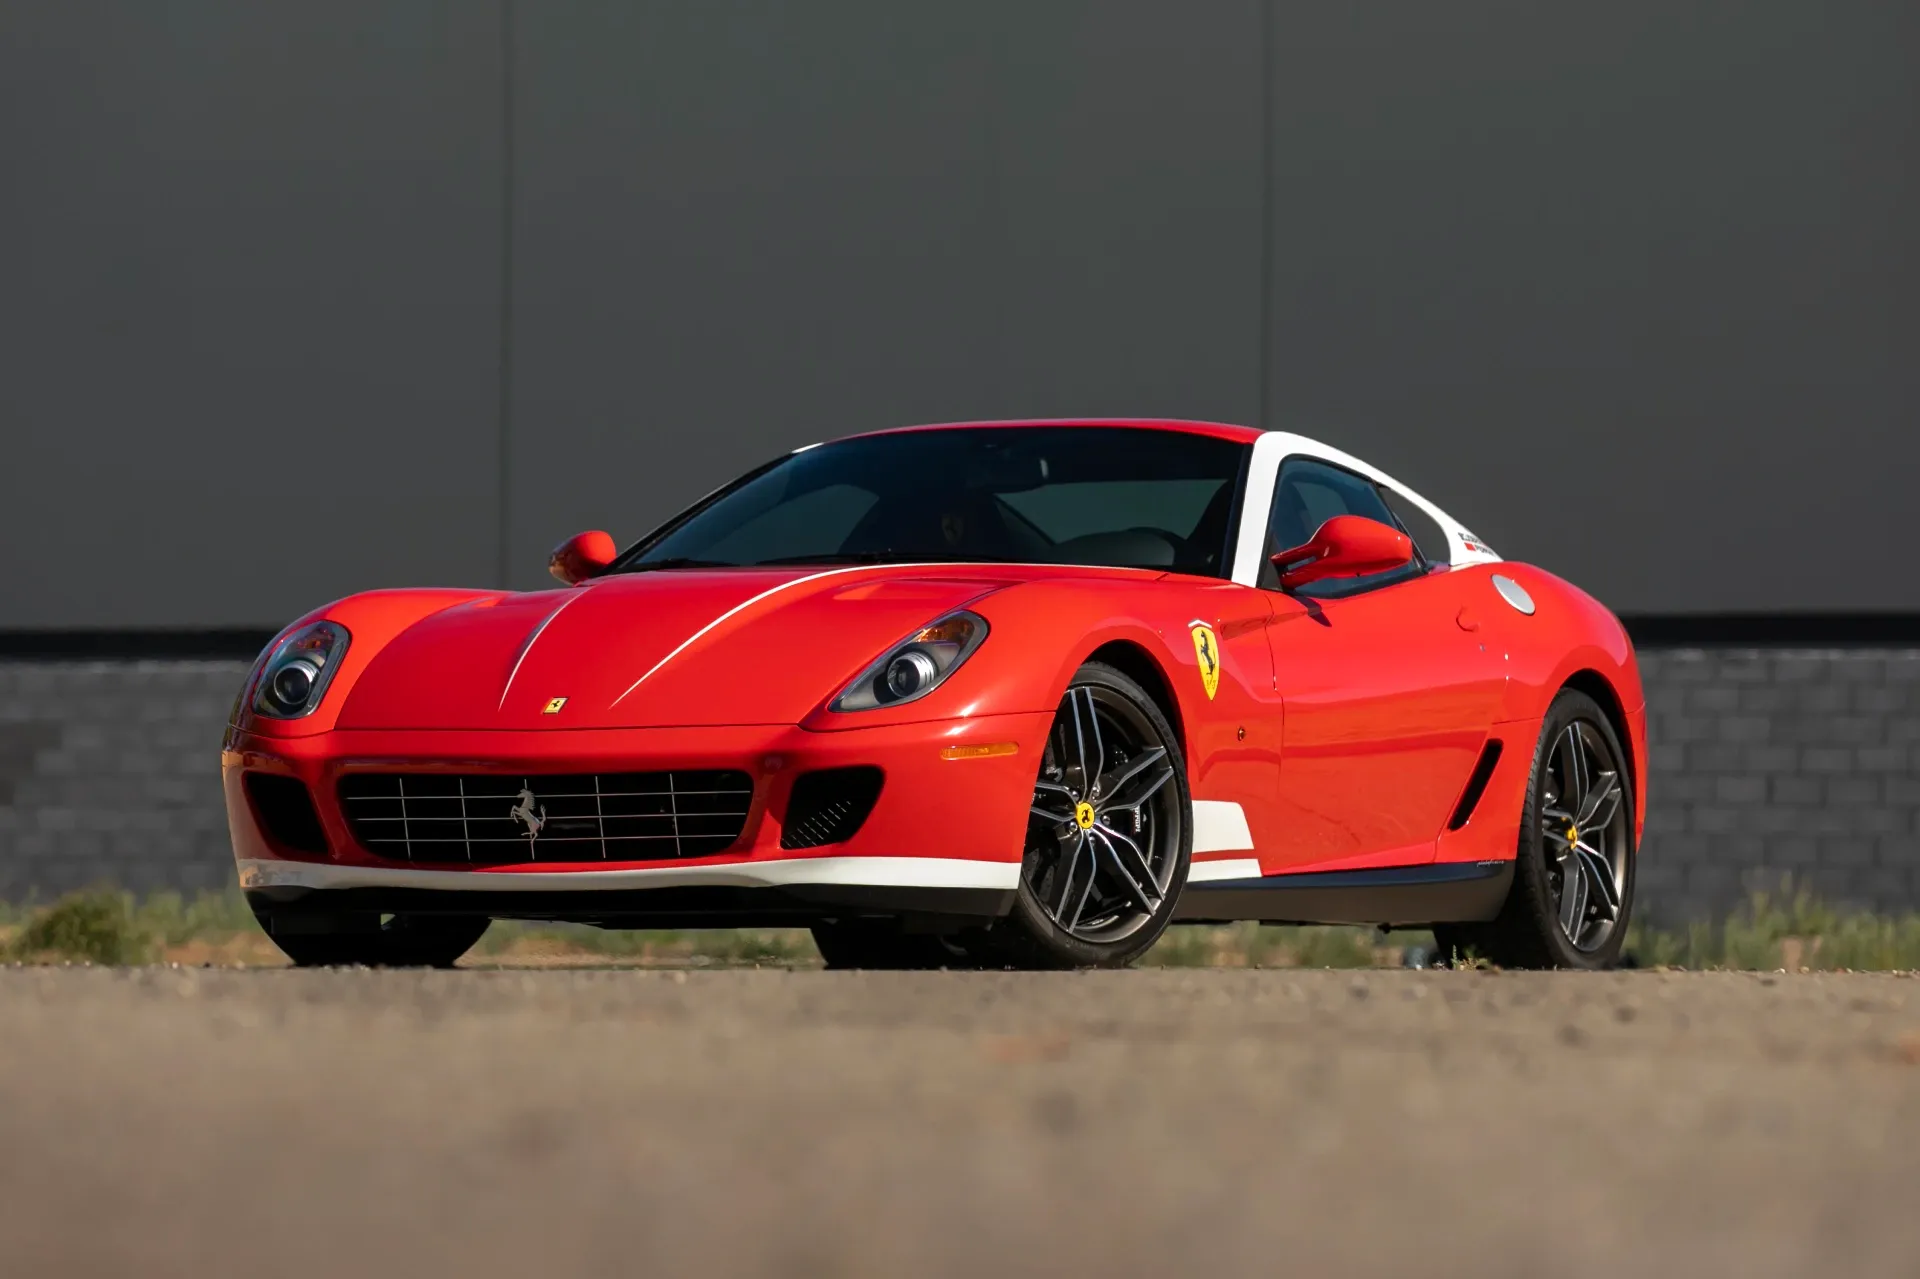 american, news, newsletter, highlights, muscle, handpicked, sports, client, classic, modern classic, europe, features, luxury, trucks, celebrity, off-road, german, rare 2011 ferrari 599 gtb fiorano alonso final edition